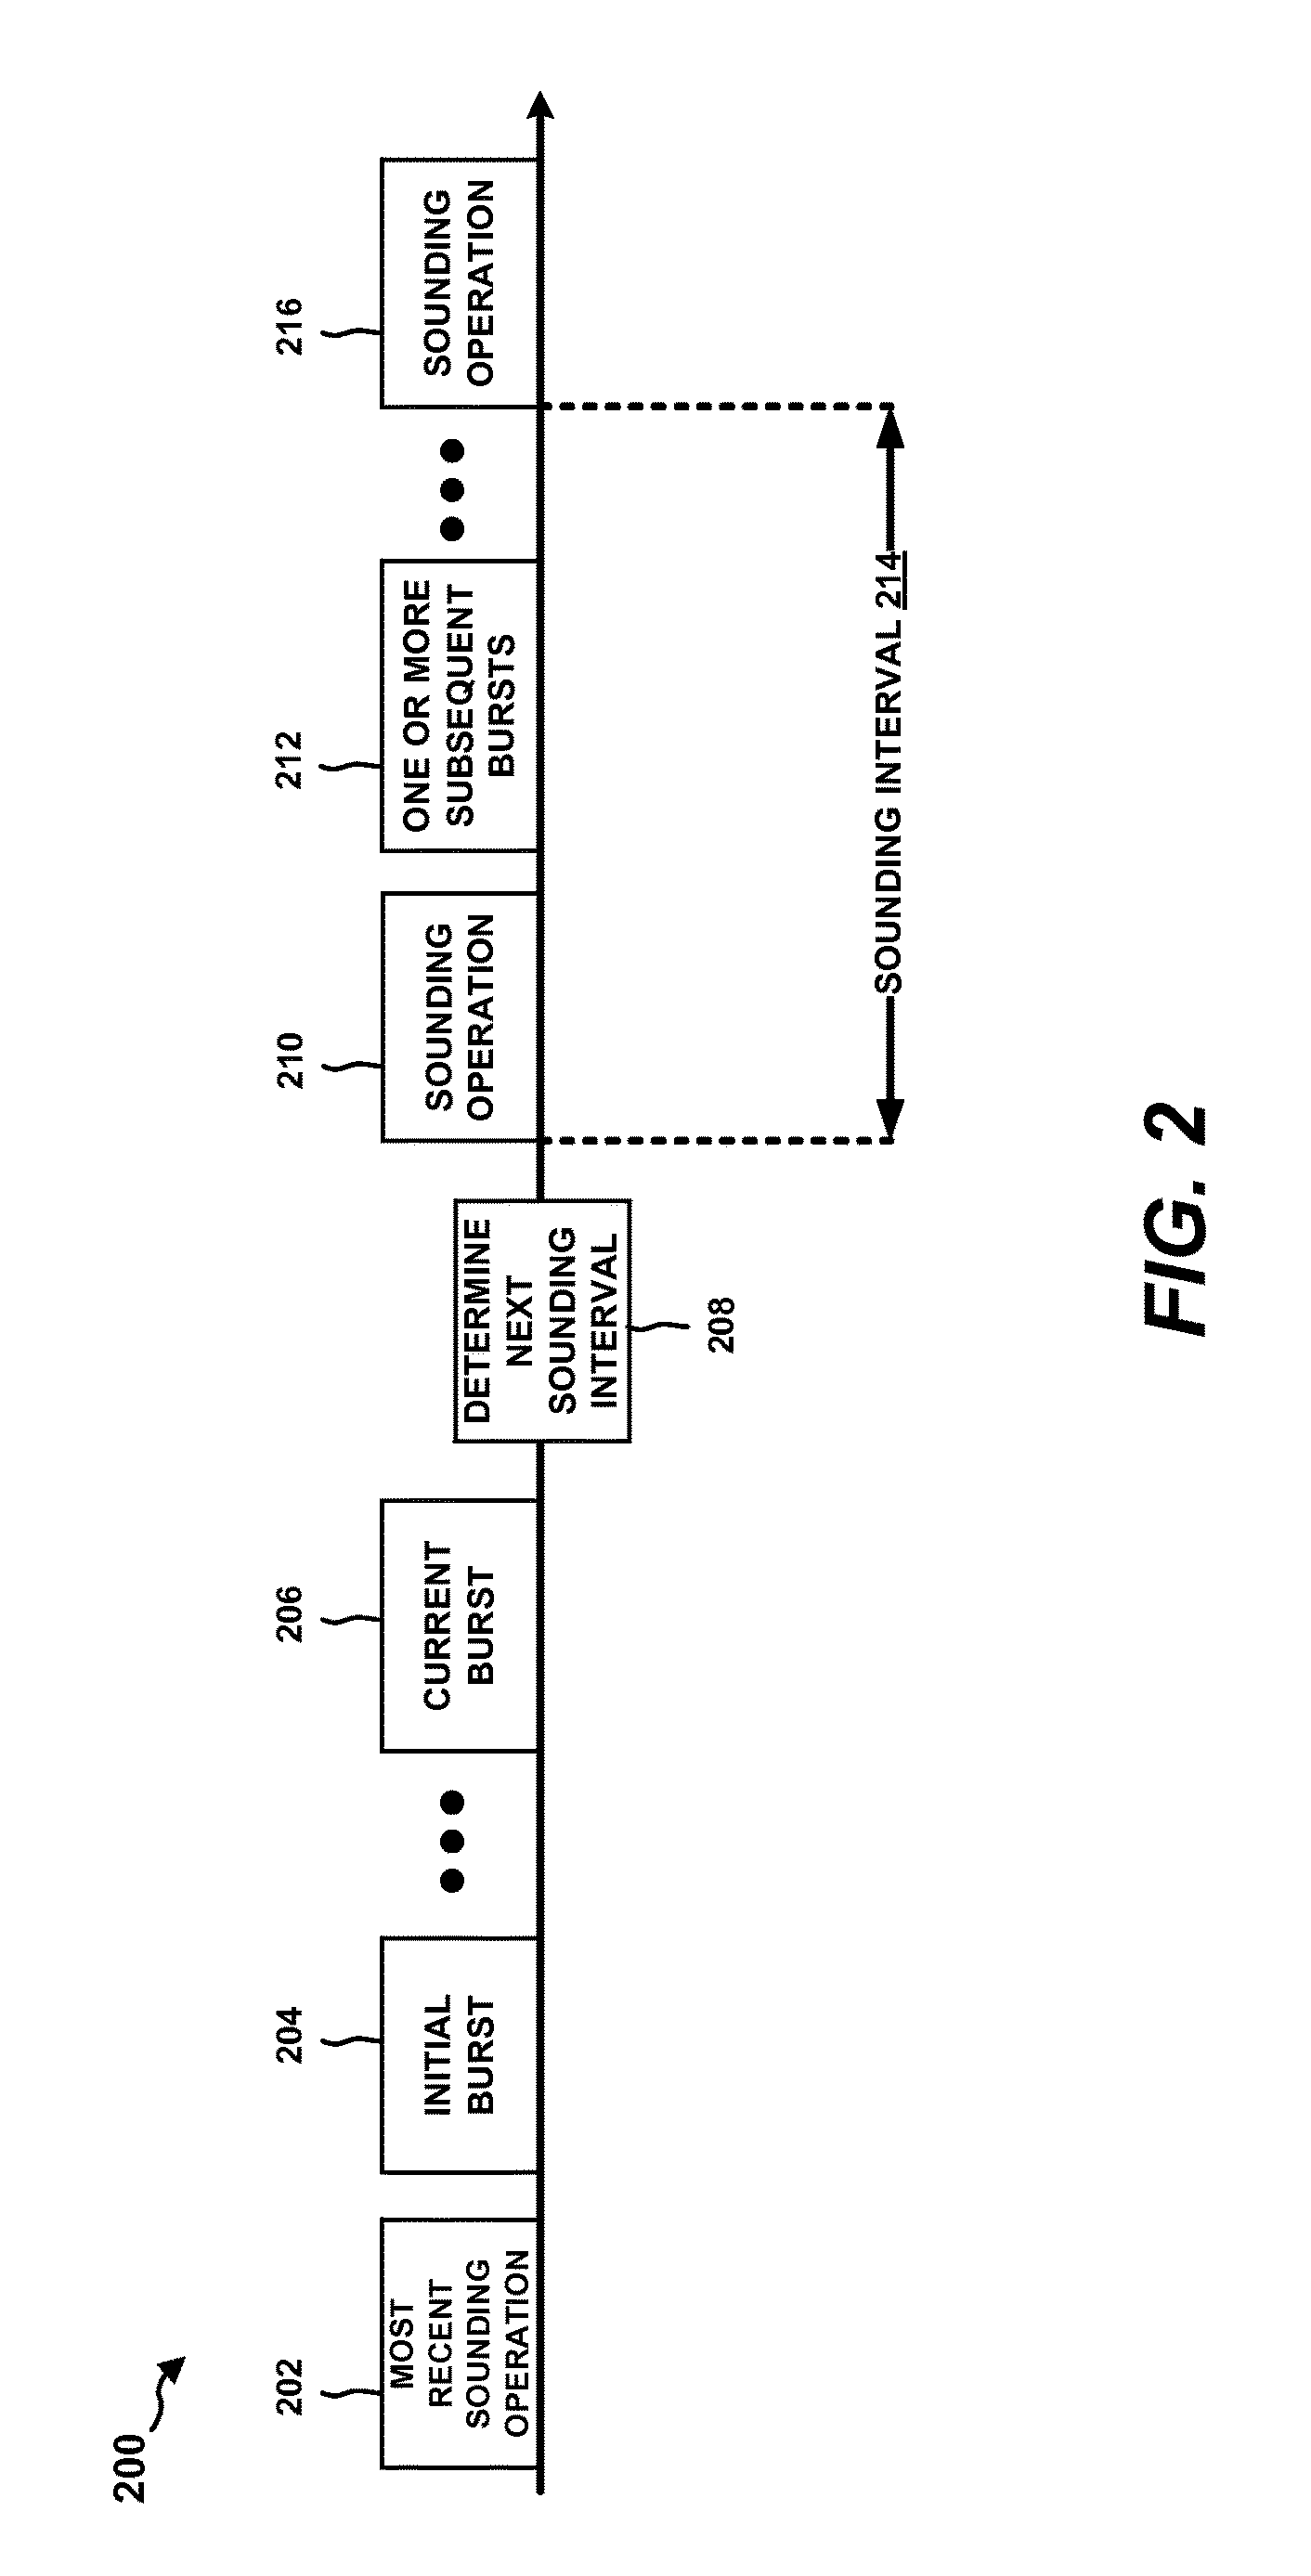 Techniques for managing sounding intervals of a wireless communications device